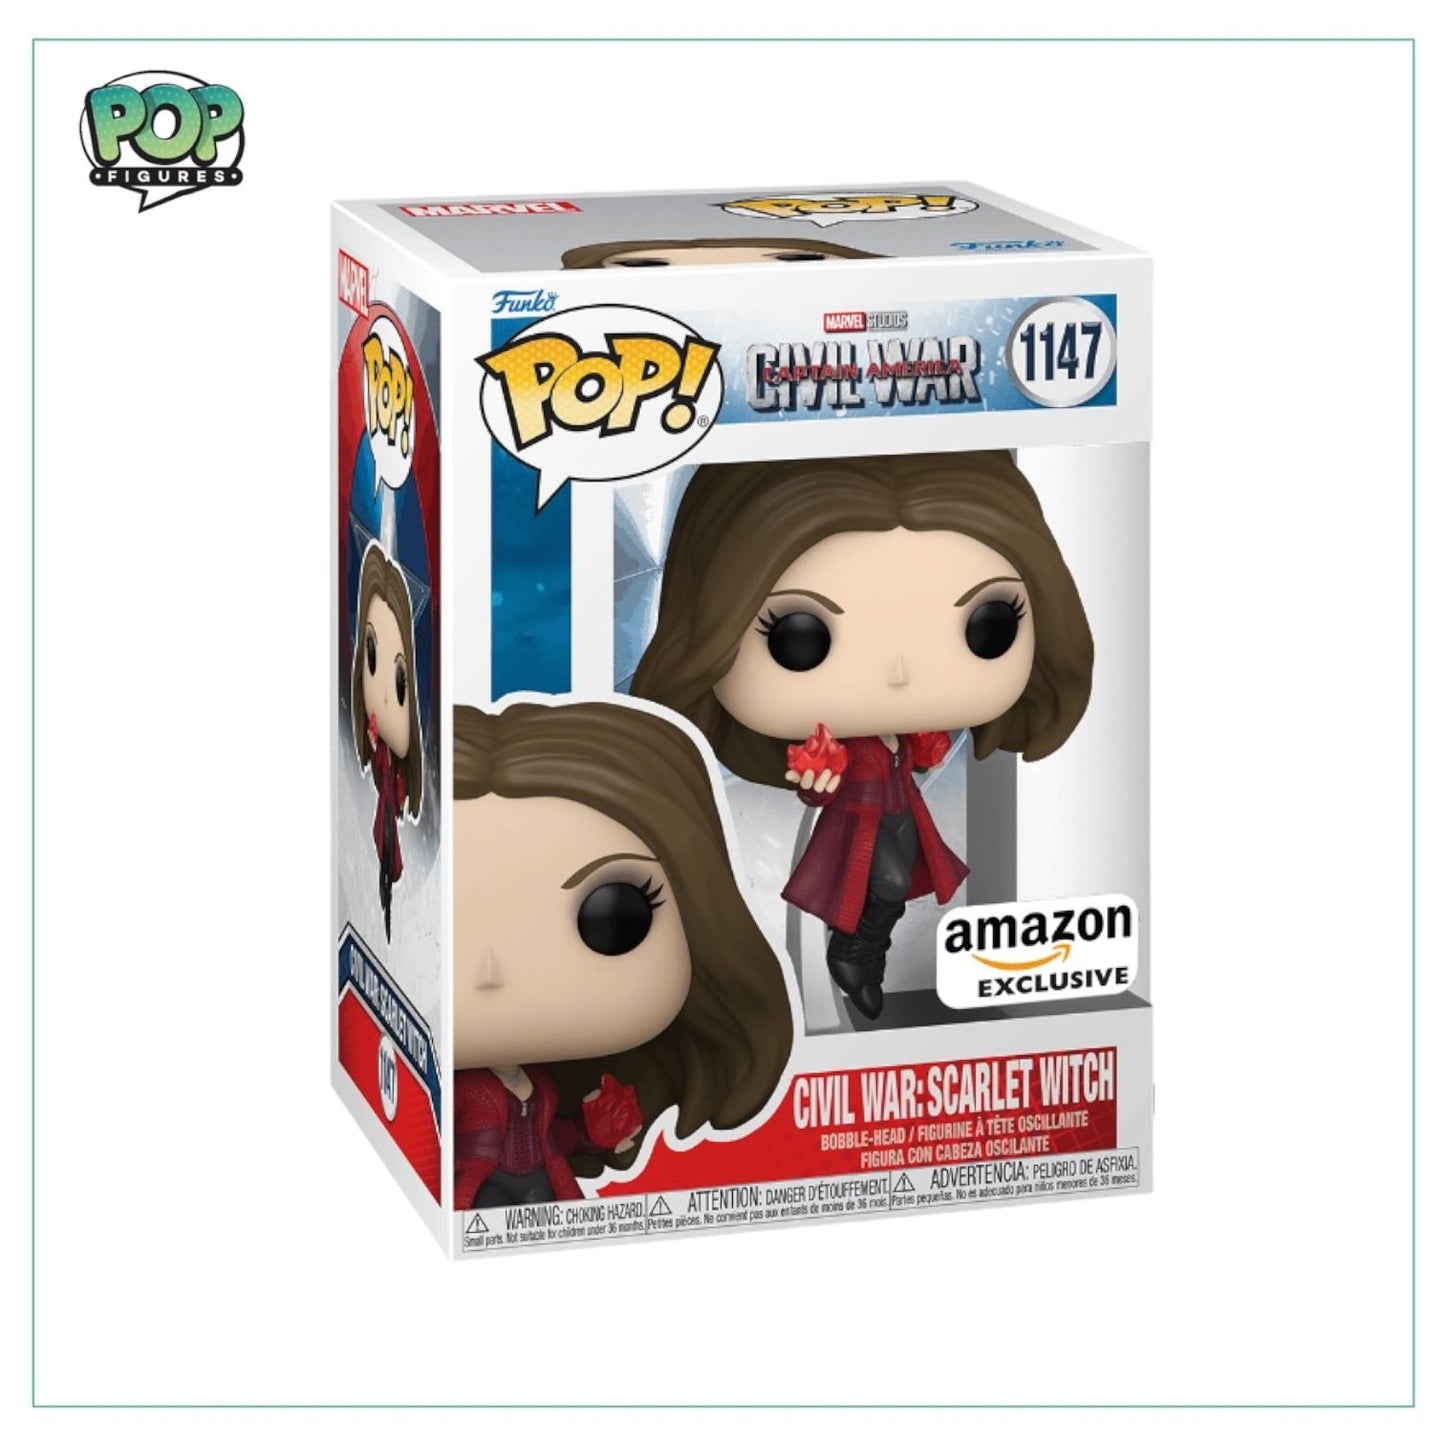 Civil War : Scarlet Witch #1147 Funko Pop! - Captain America Civil War - Amazon Exclusive - Angry Cat